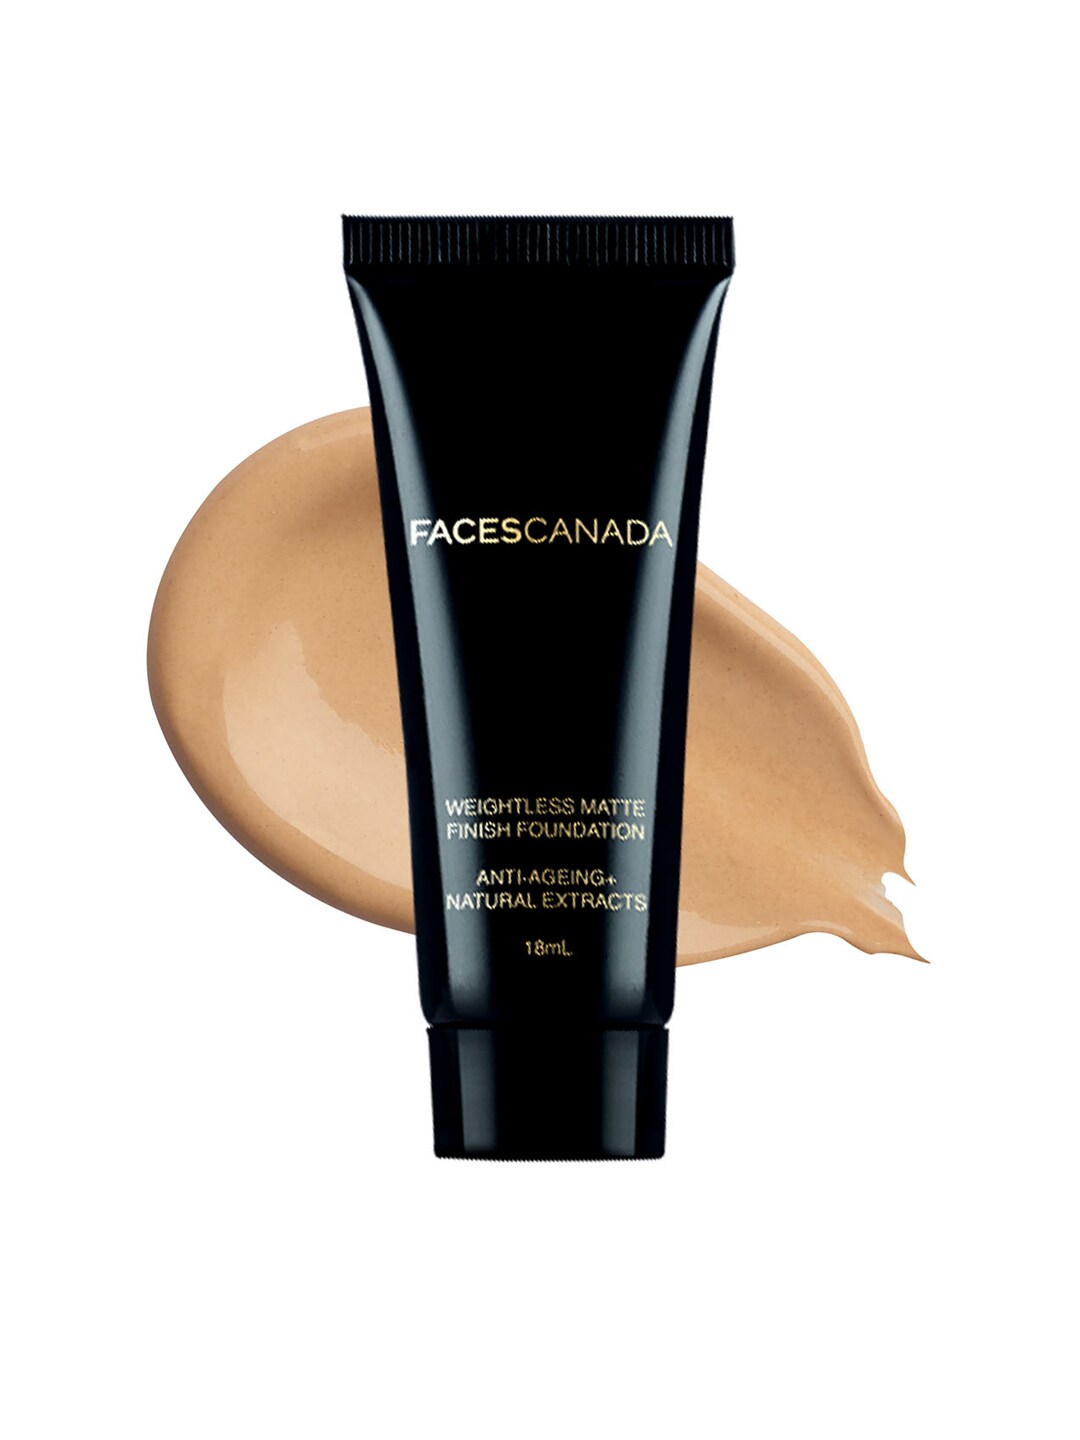 FACES CANADA Weightless Matte Finish Mini Foundation Beige 03 18ml Price in India